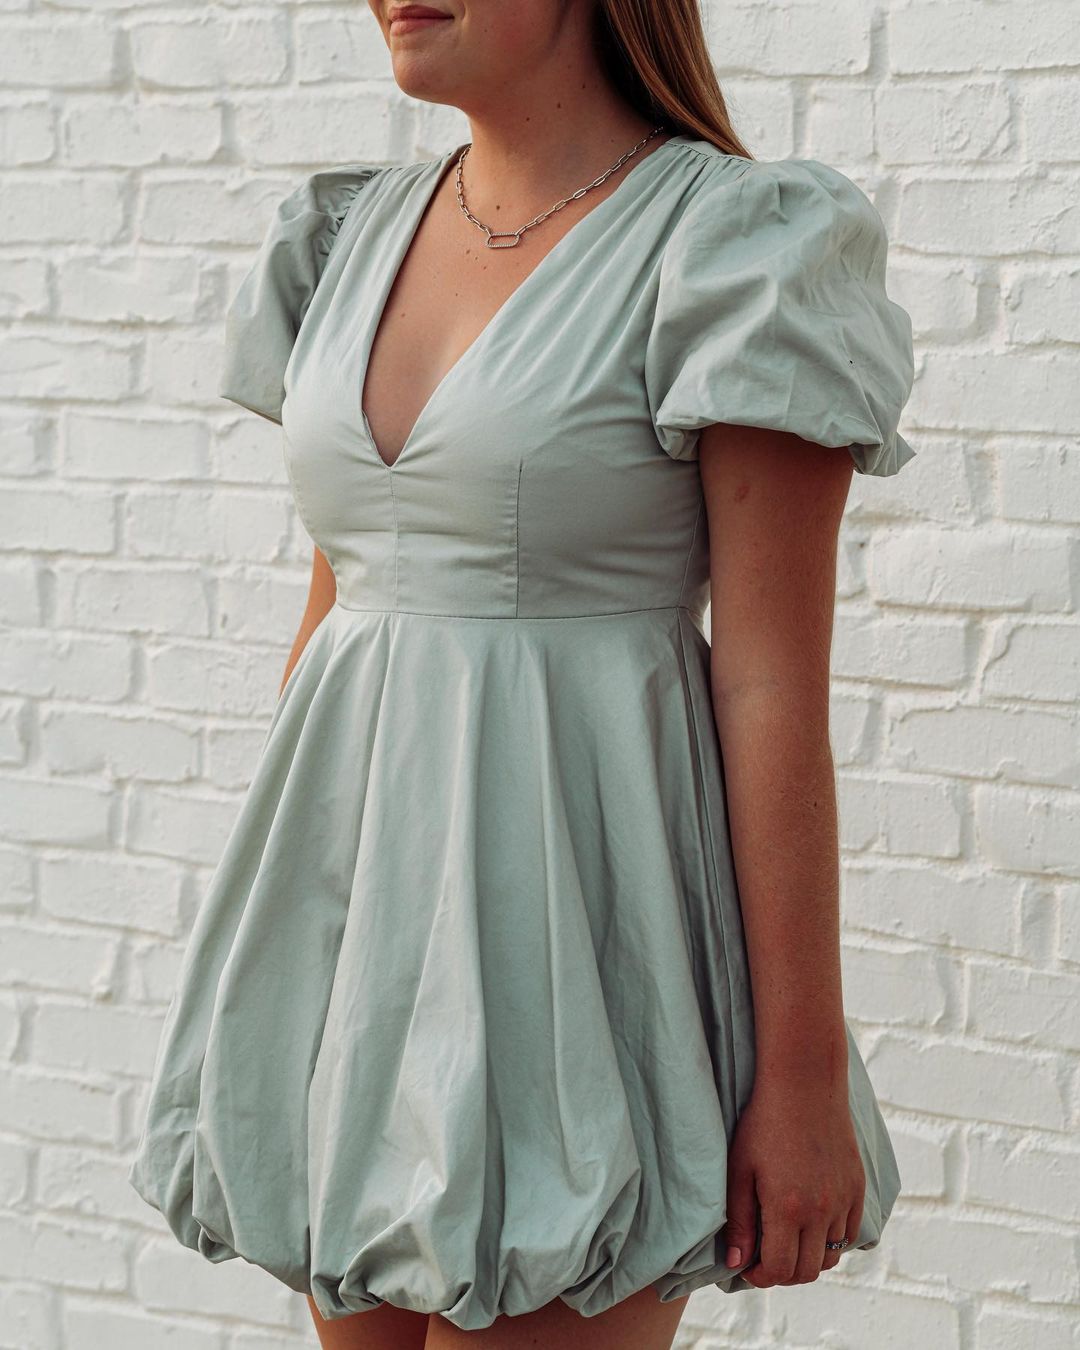 cherielane How to Wear the Bubble Dress: Impress by Styling this Comeback Trend!